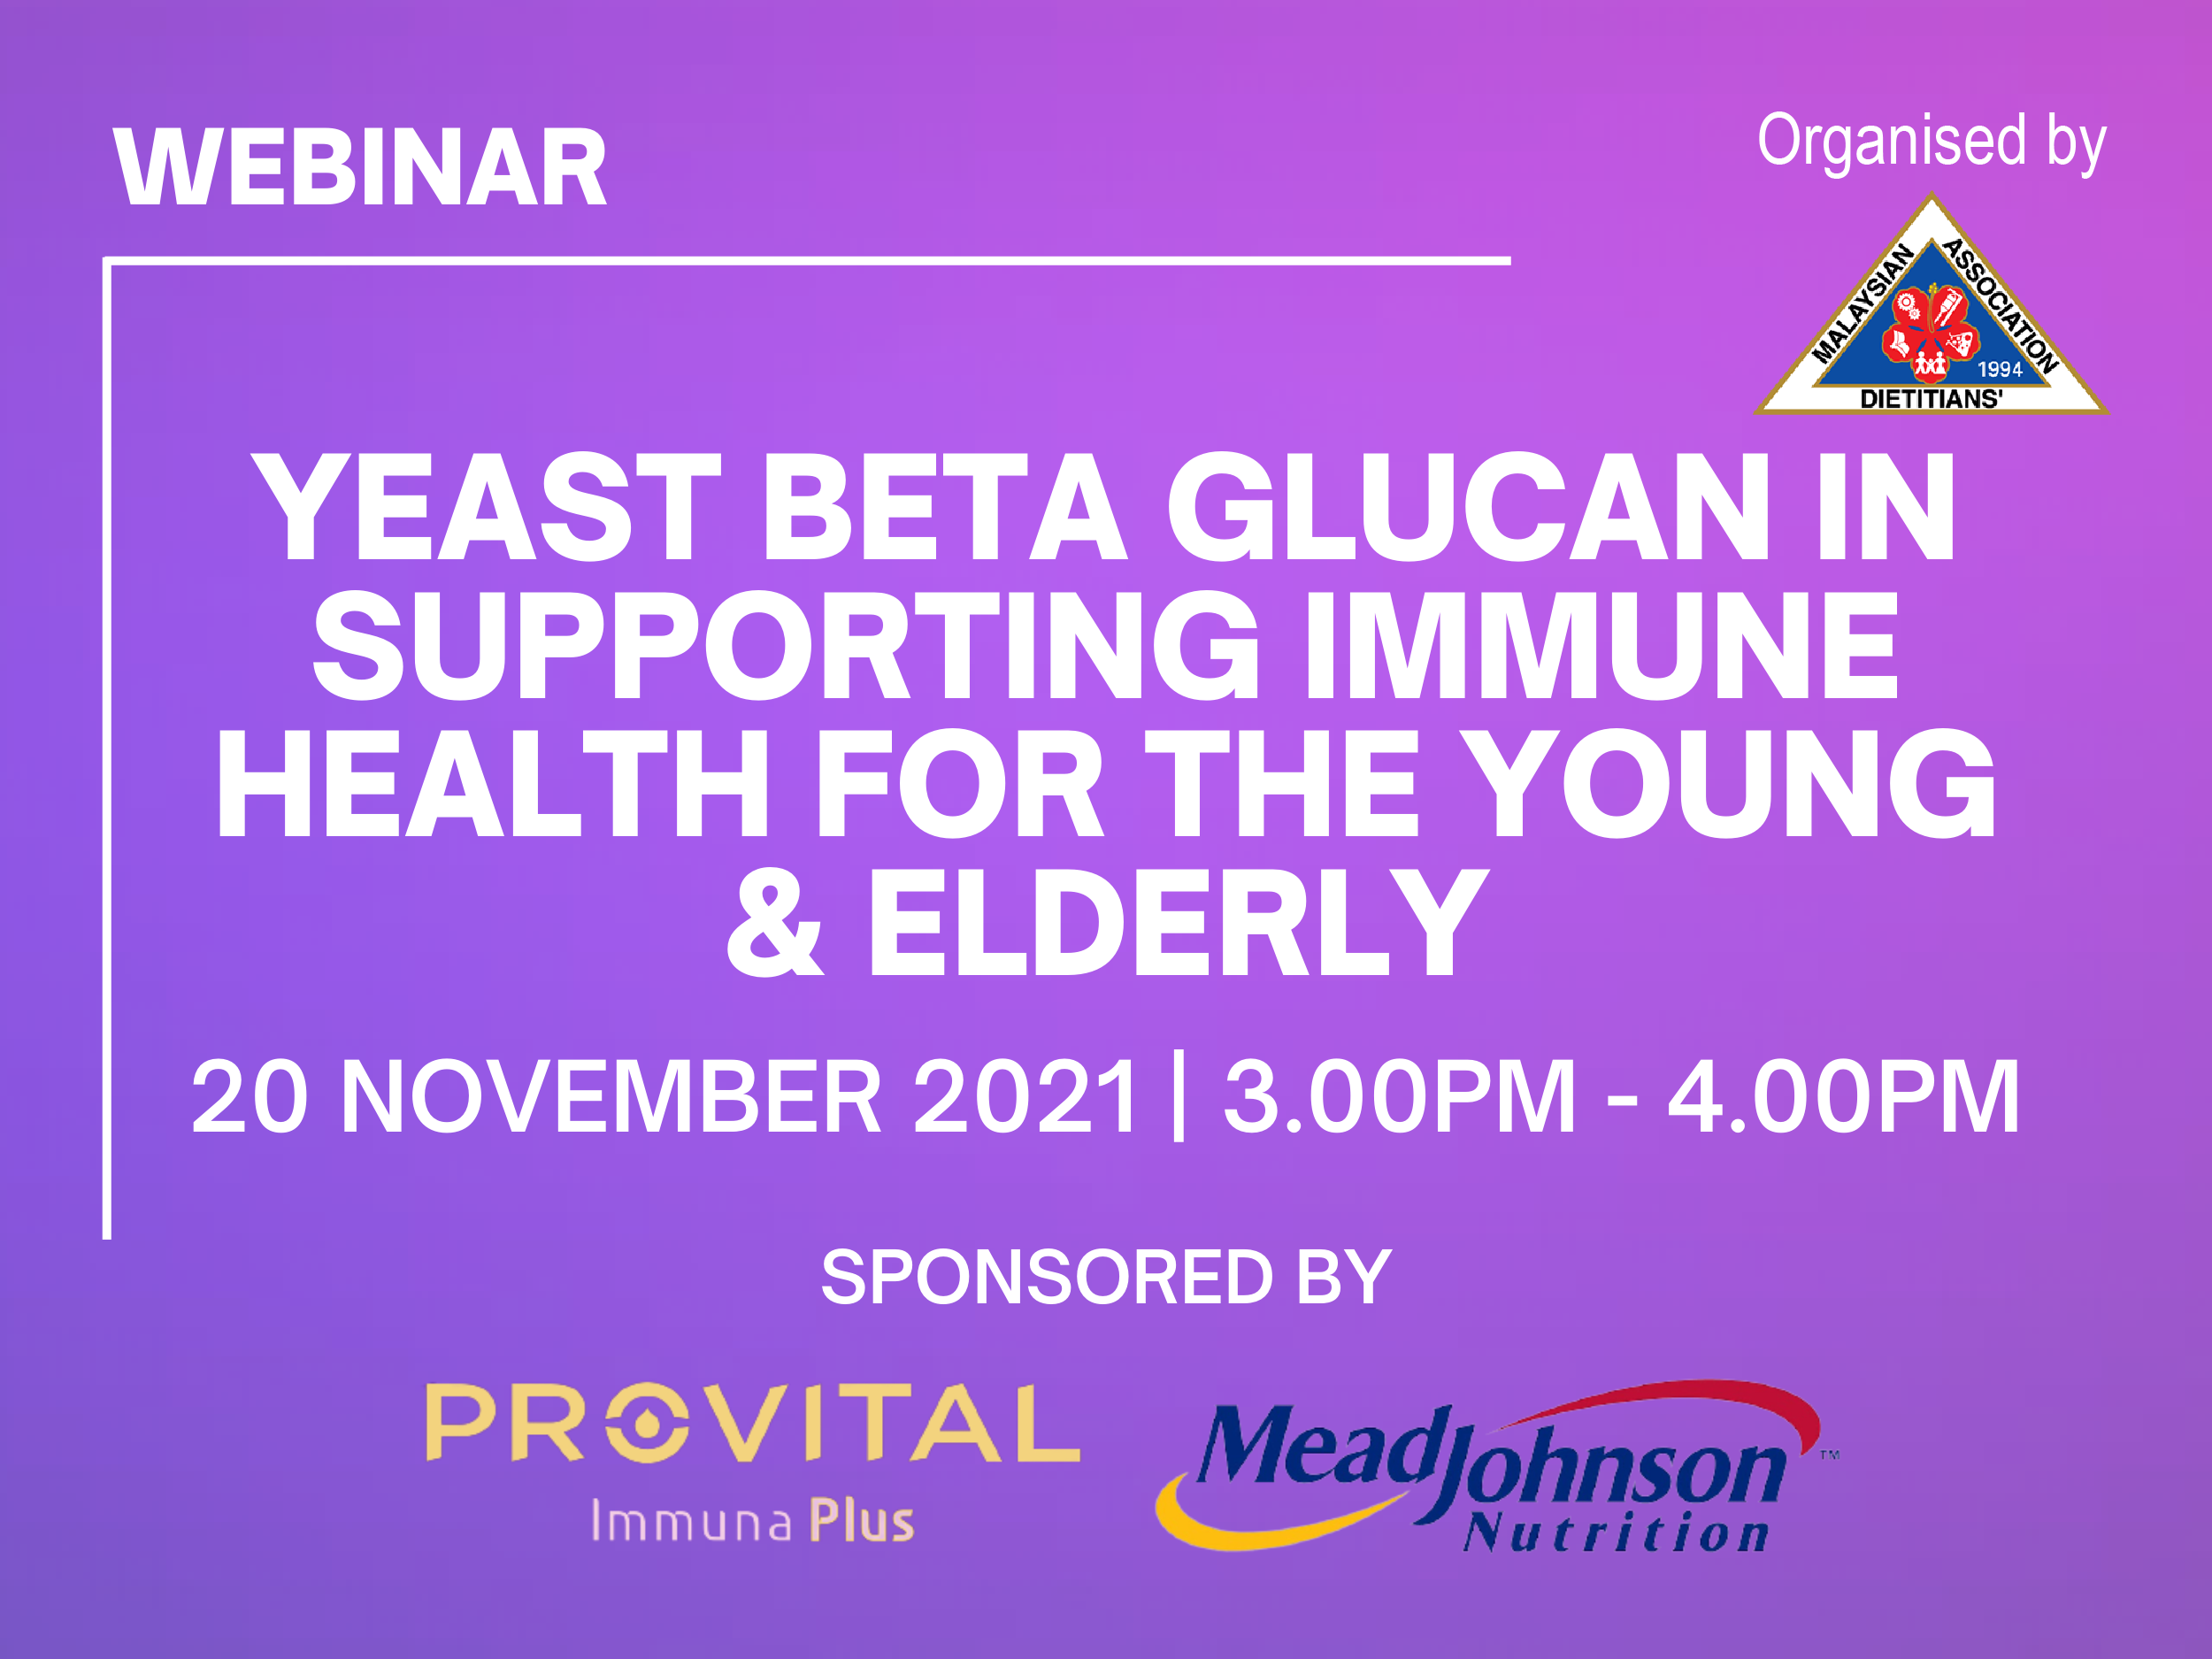 Yeast Beta Glucan in Supporting Immune Health for the Young & Elderly